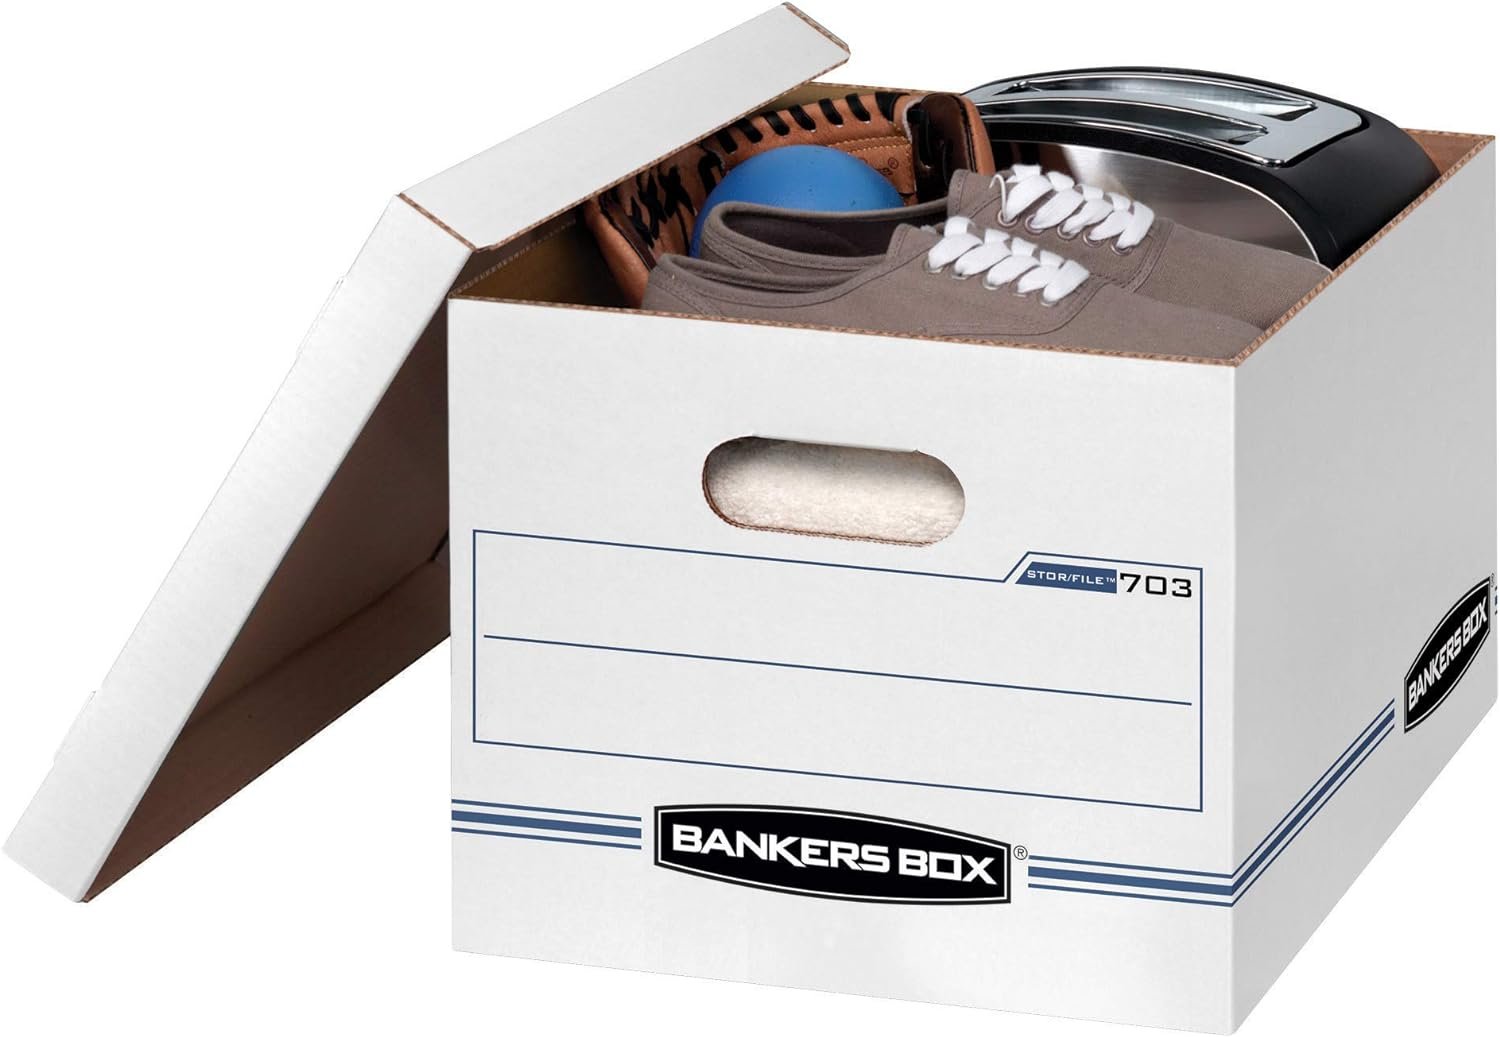 Bankers Box Storage Boxes Review